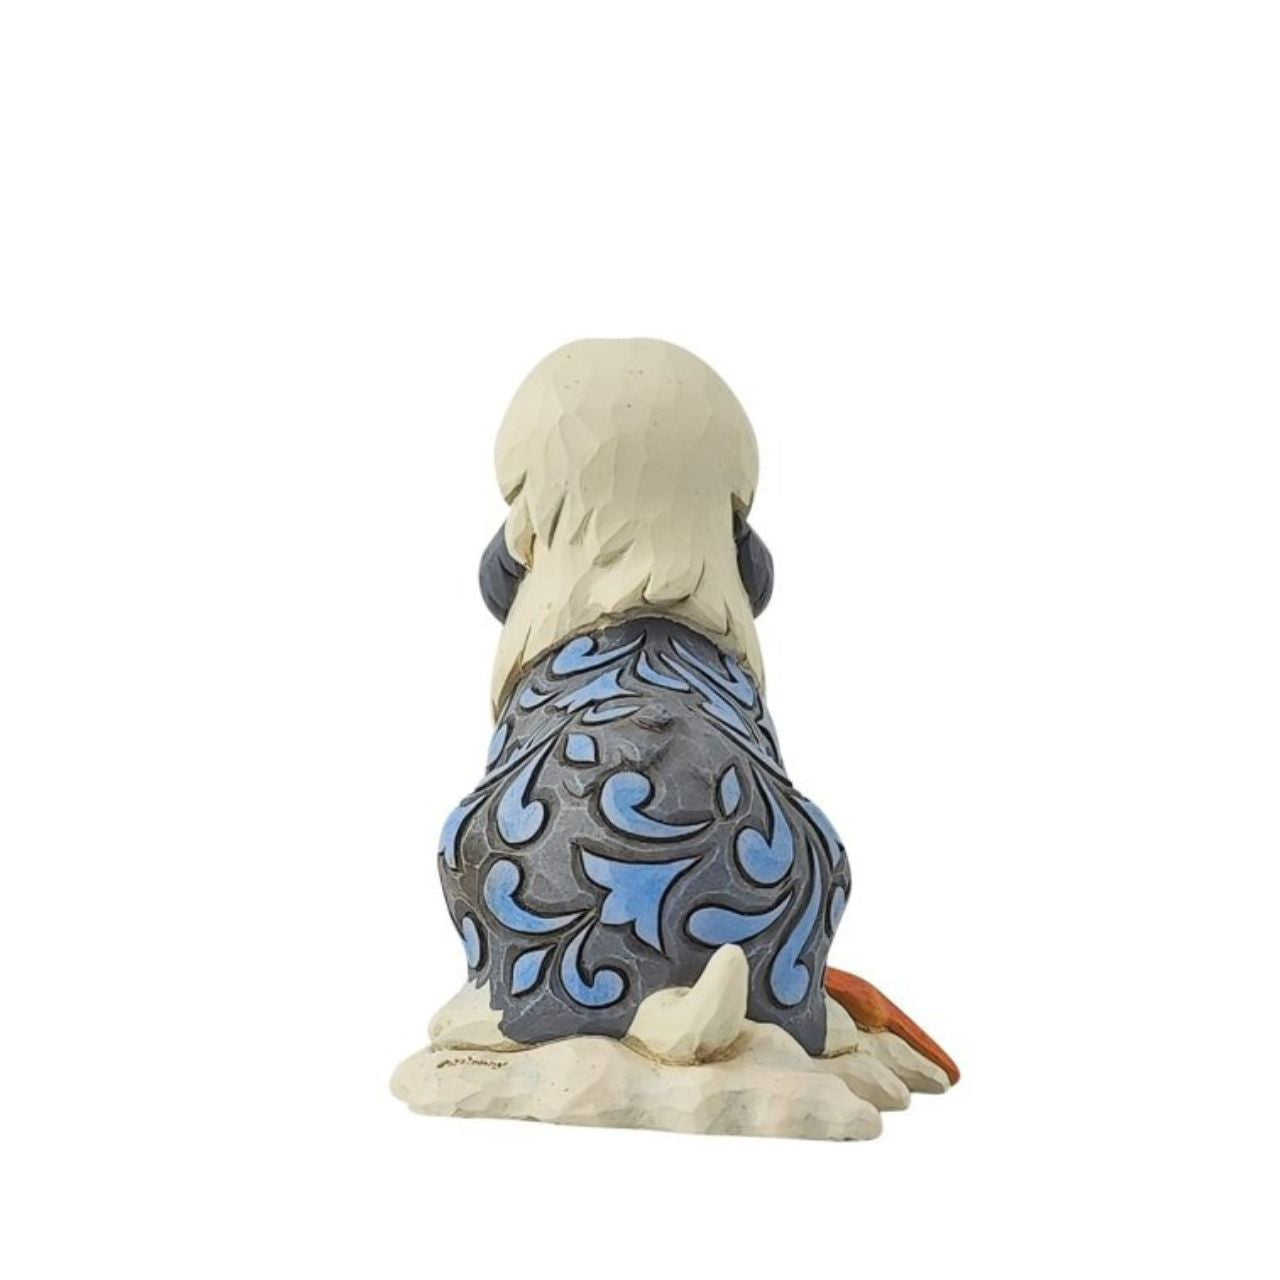 Max Mini Figurine by Jim Shore  Inspired by The Little Mermaid, this Jim Shore creation features Prince Eric's dog, Max, with the artist's iconic rosemale patterning and detailed craftsmanship. The replica makes a charming addition to any Disney lover's home décor.